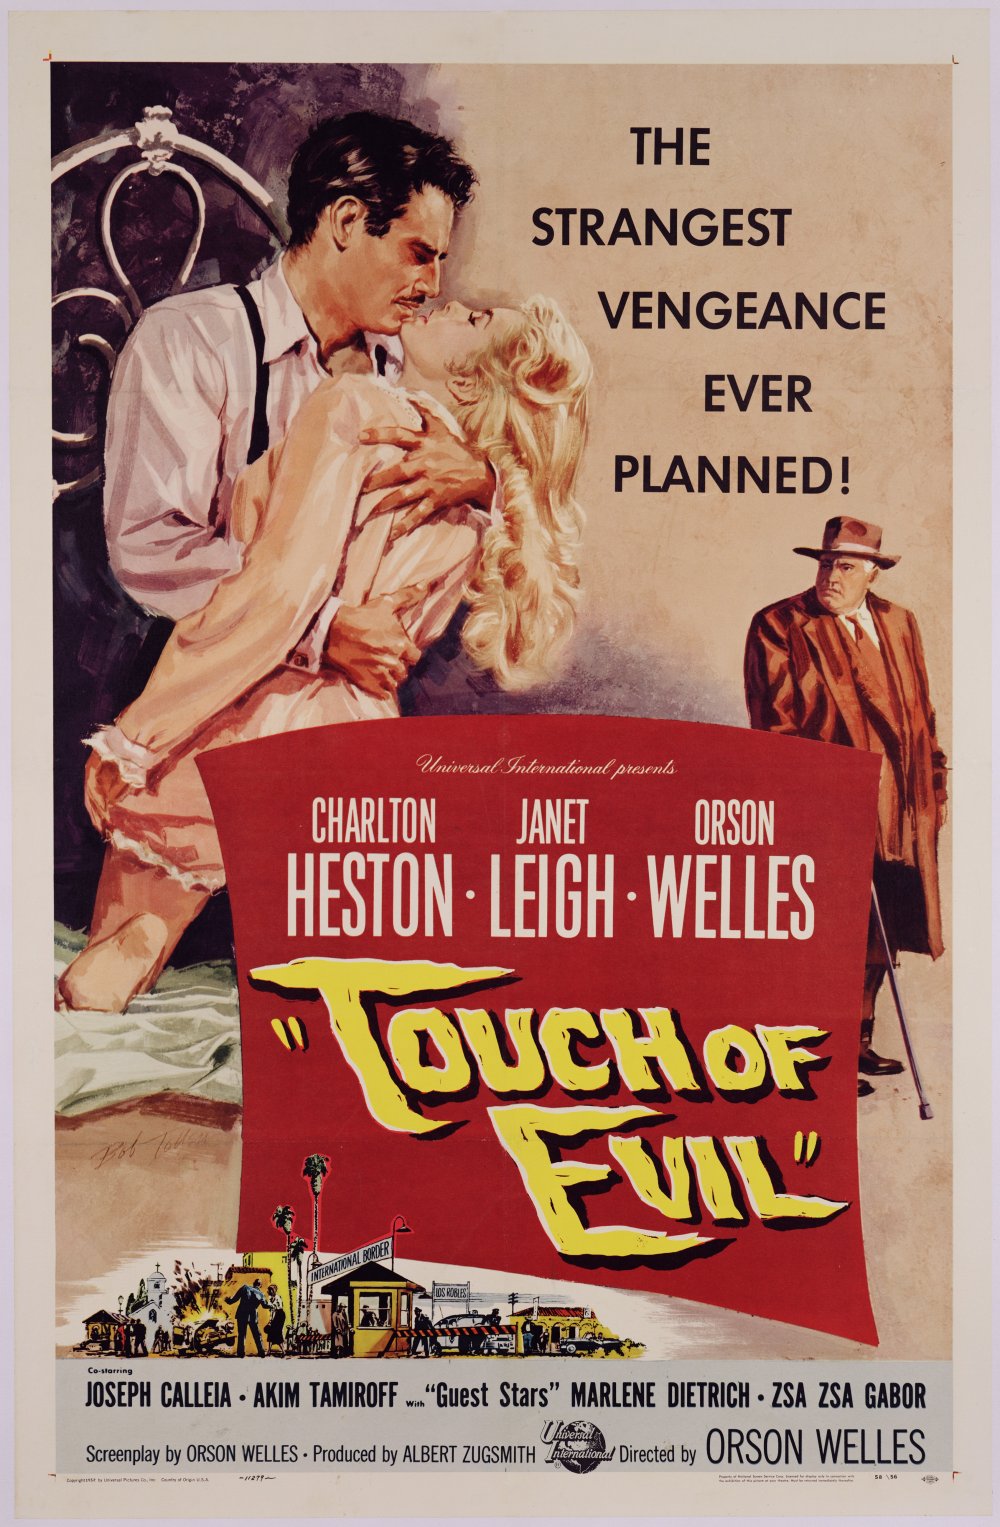 Aero Theatre Presents: Double Feature Touch of Evil & The Lady from Shanghai